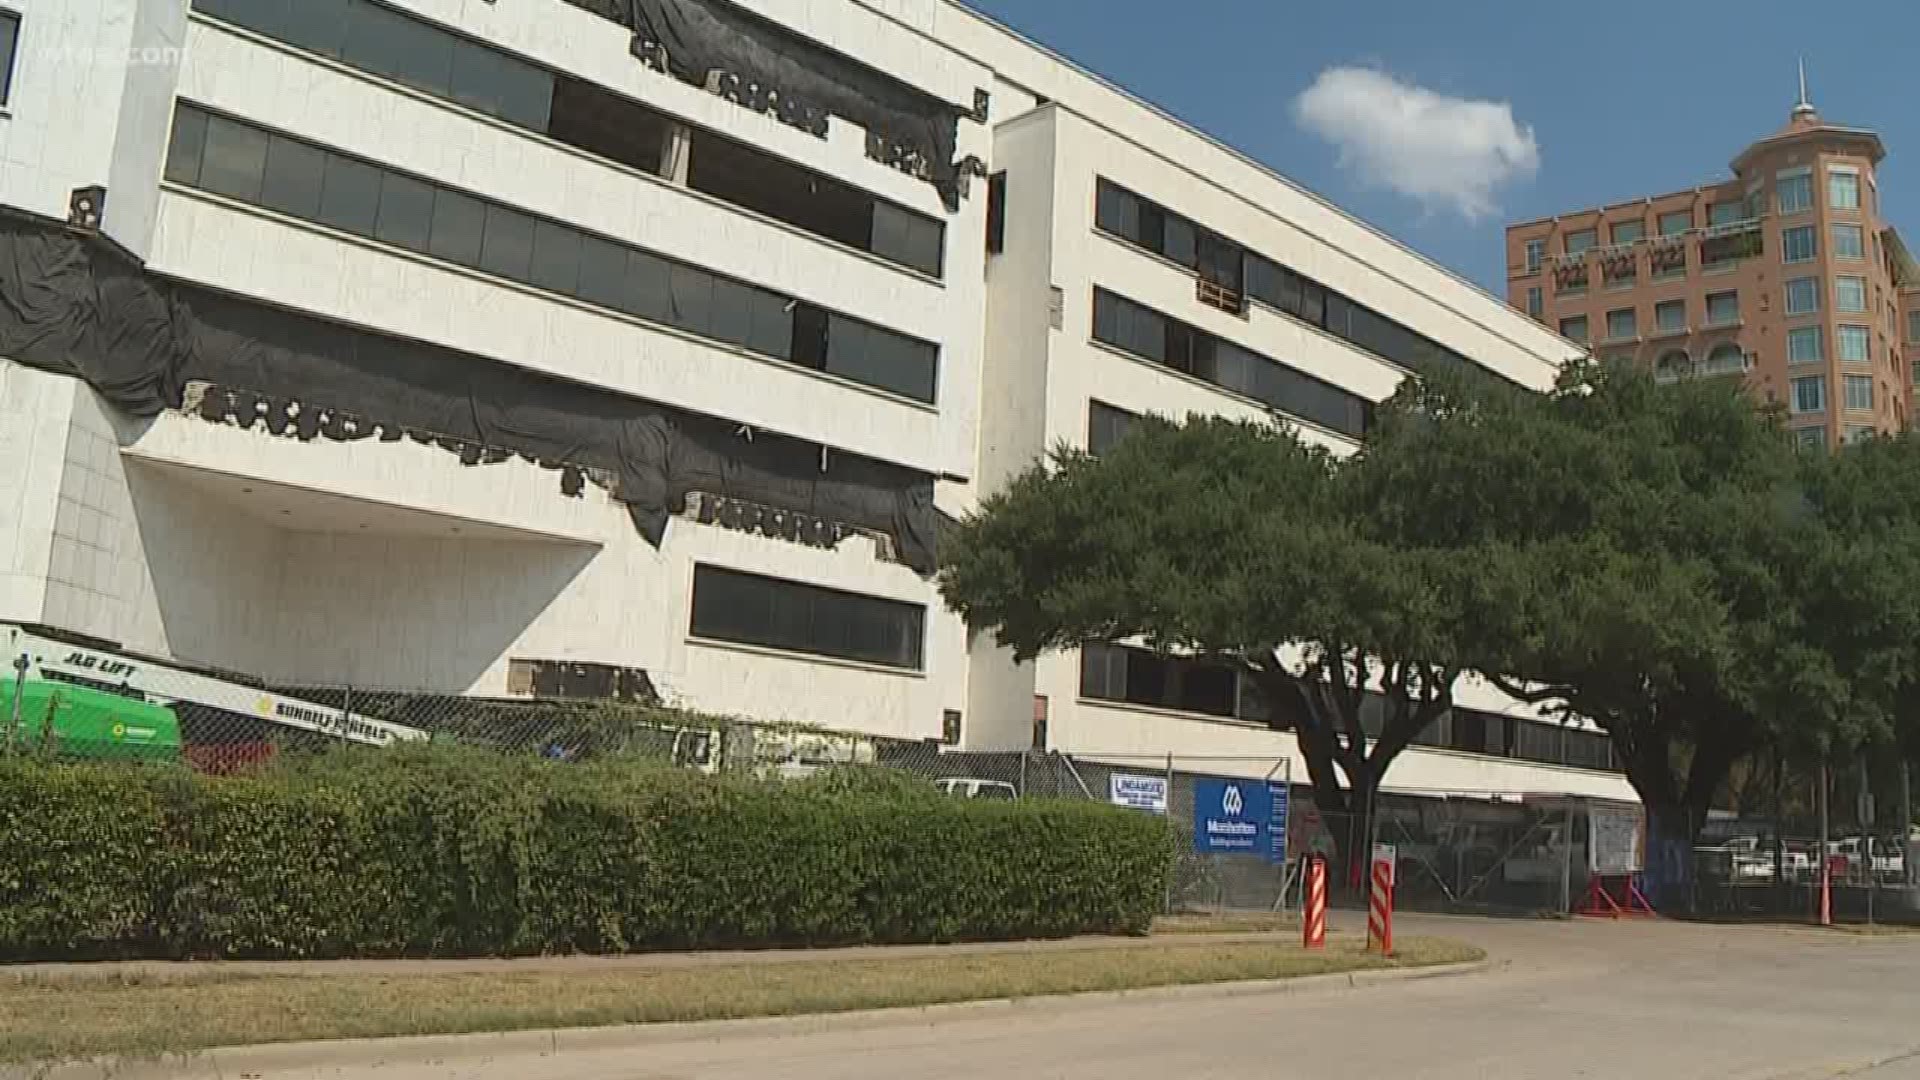 An implosion of a 9-story building is scheduled on Sunday morning in Uptown Dallas. The implosion will happen at the 2727 block of Turtle Creek Boulevard. 

Crews began blocking off roads Saturday morning on Turtle Creek Boulevard to prepare for the implosion.